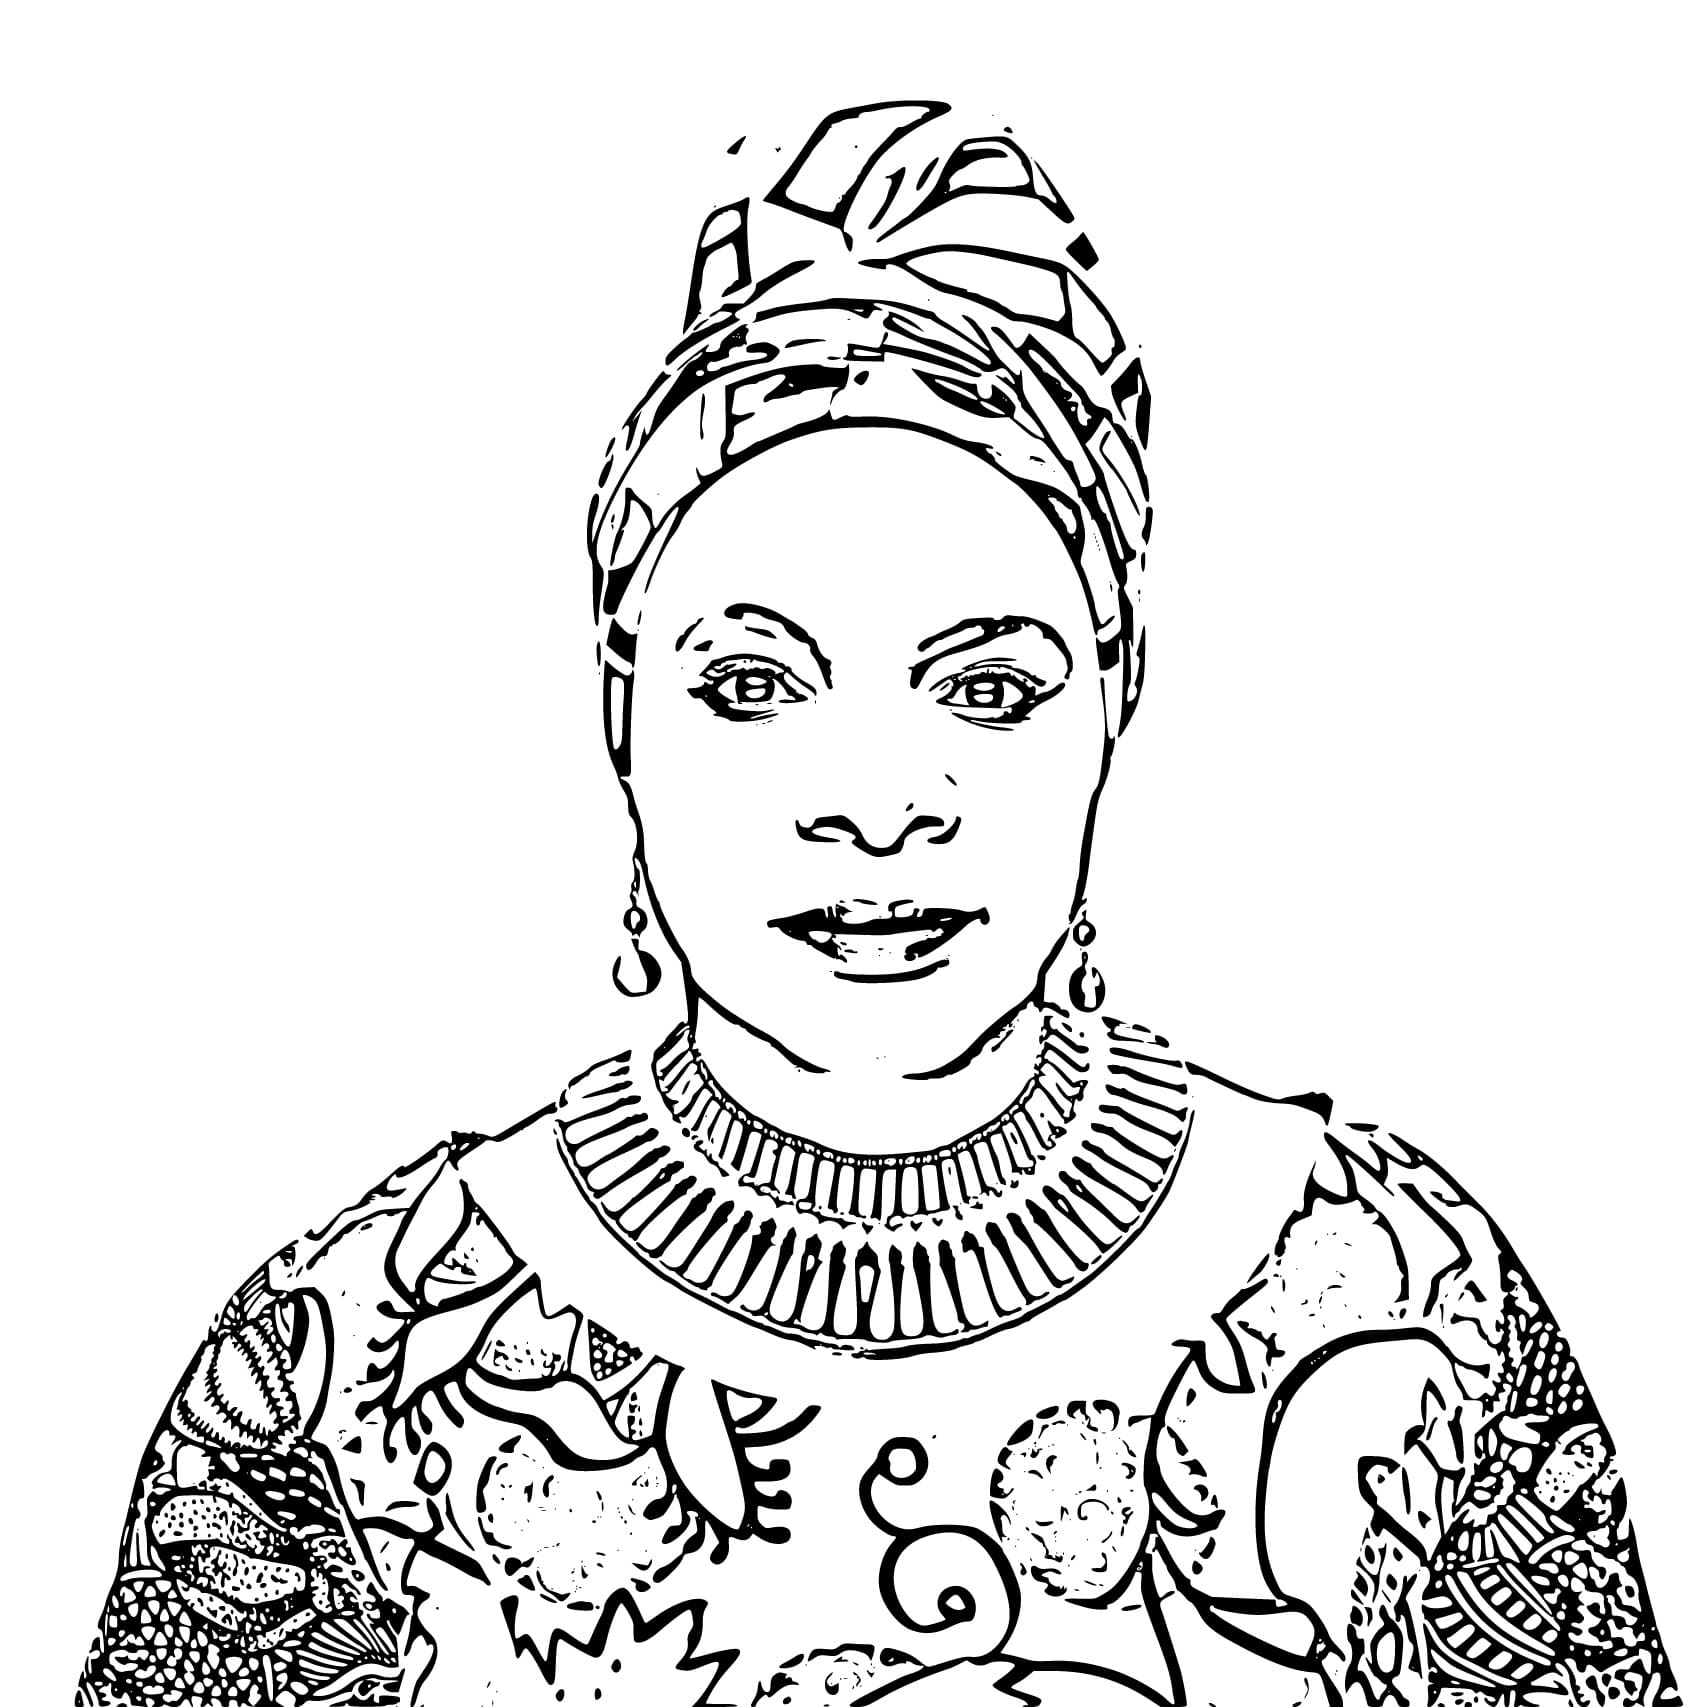 Angélique Kidjo coloring page - Download, Print or Color Online for Free